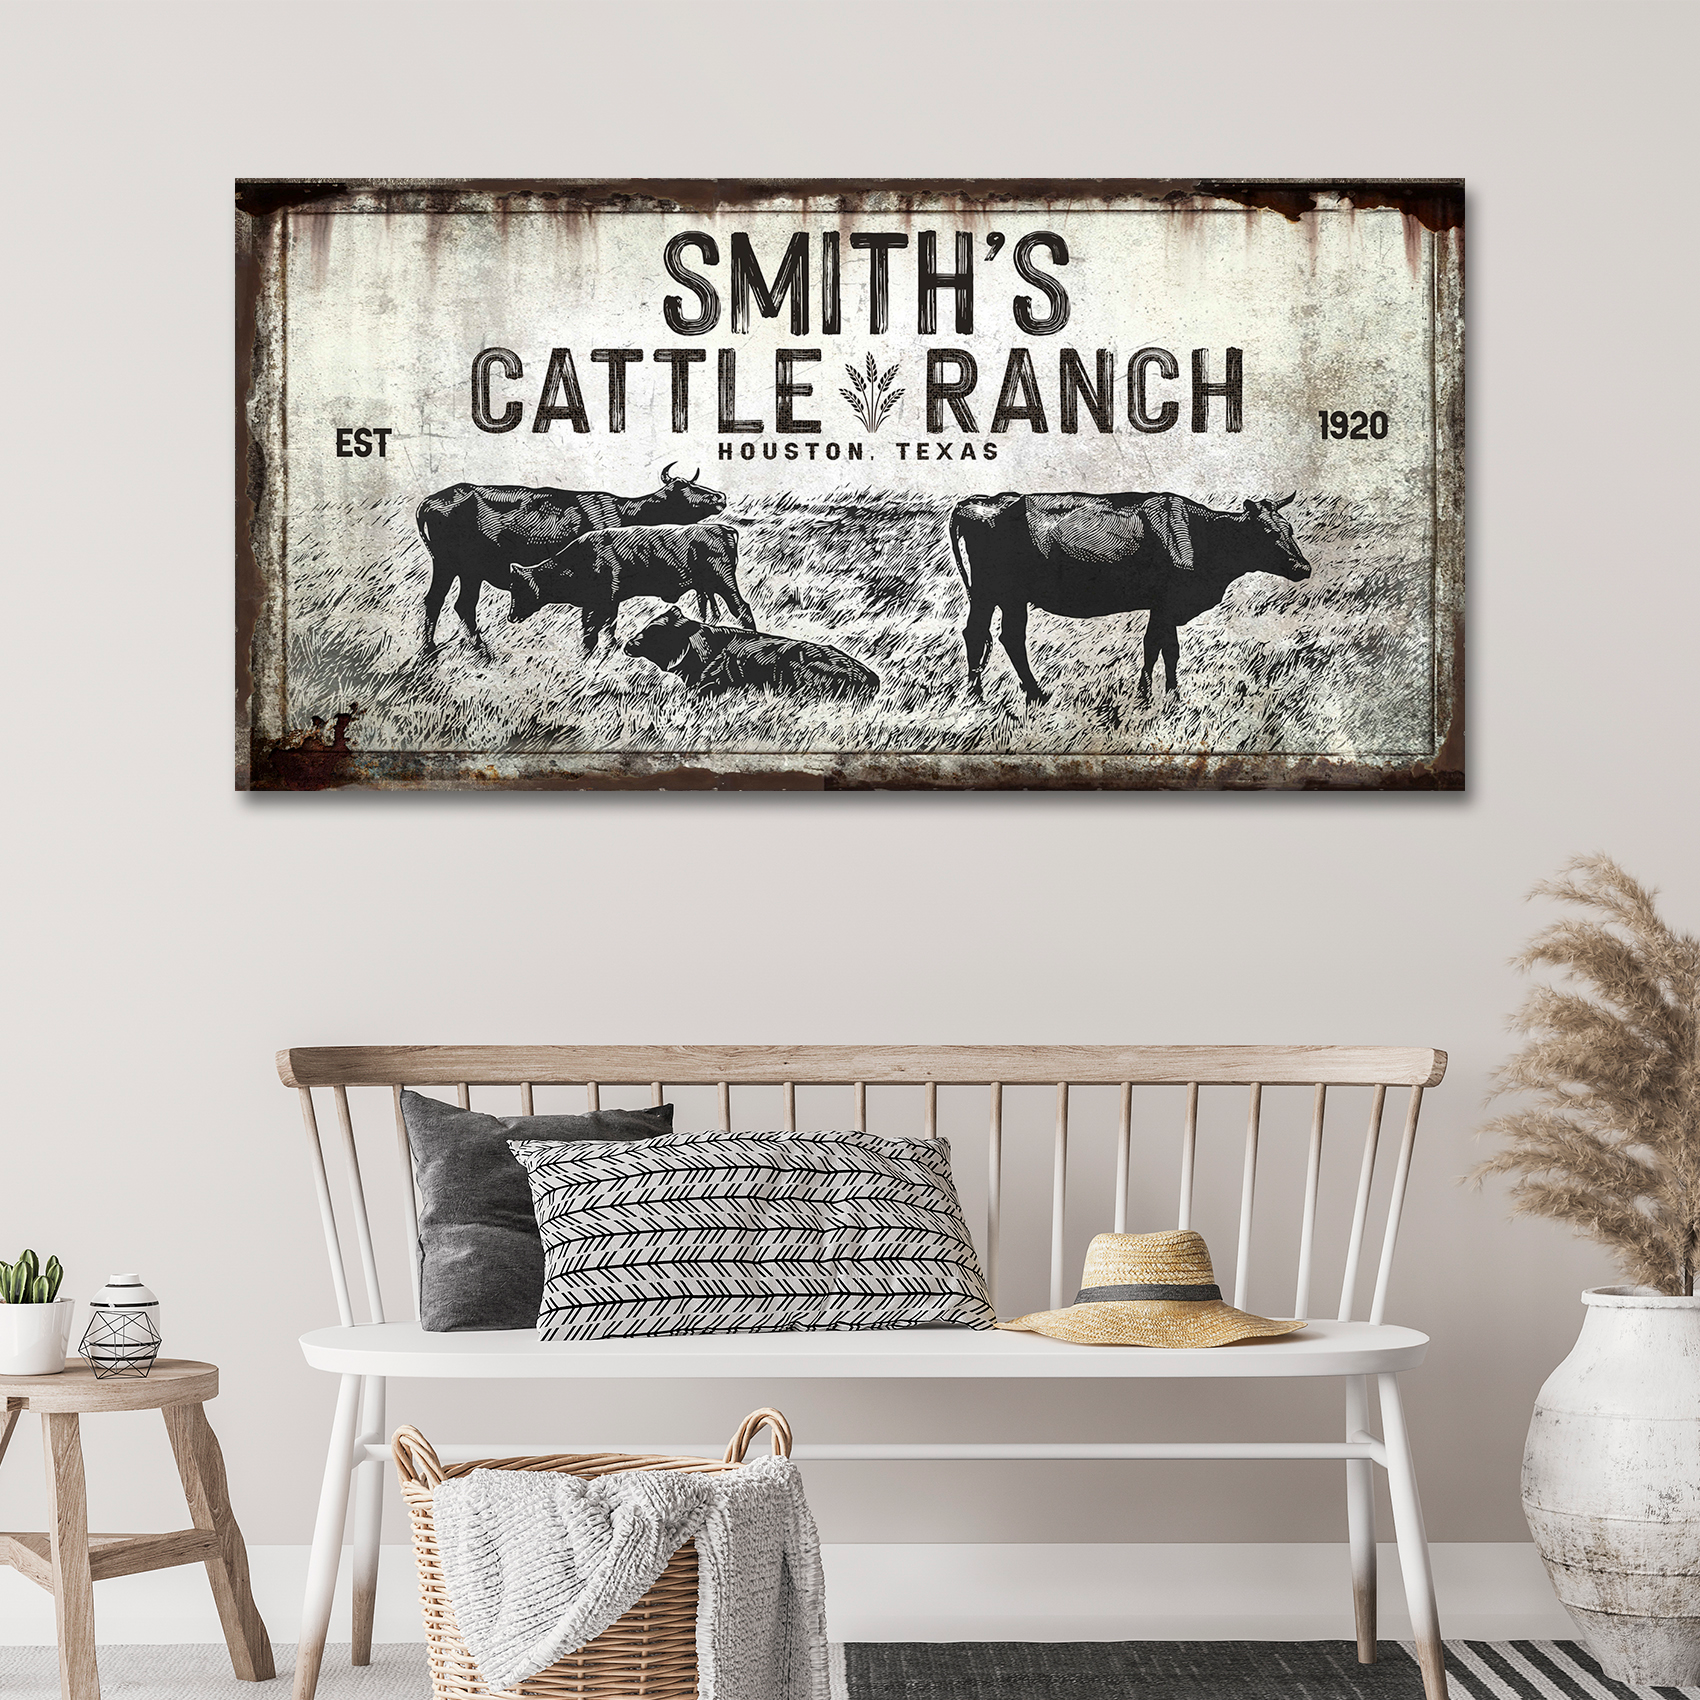 Cattle Ranch Foliage Sign - Image by Tailored Canvases